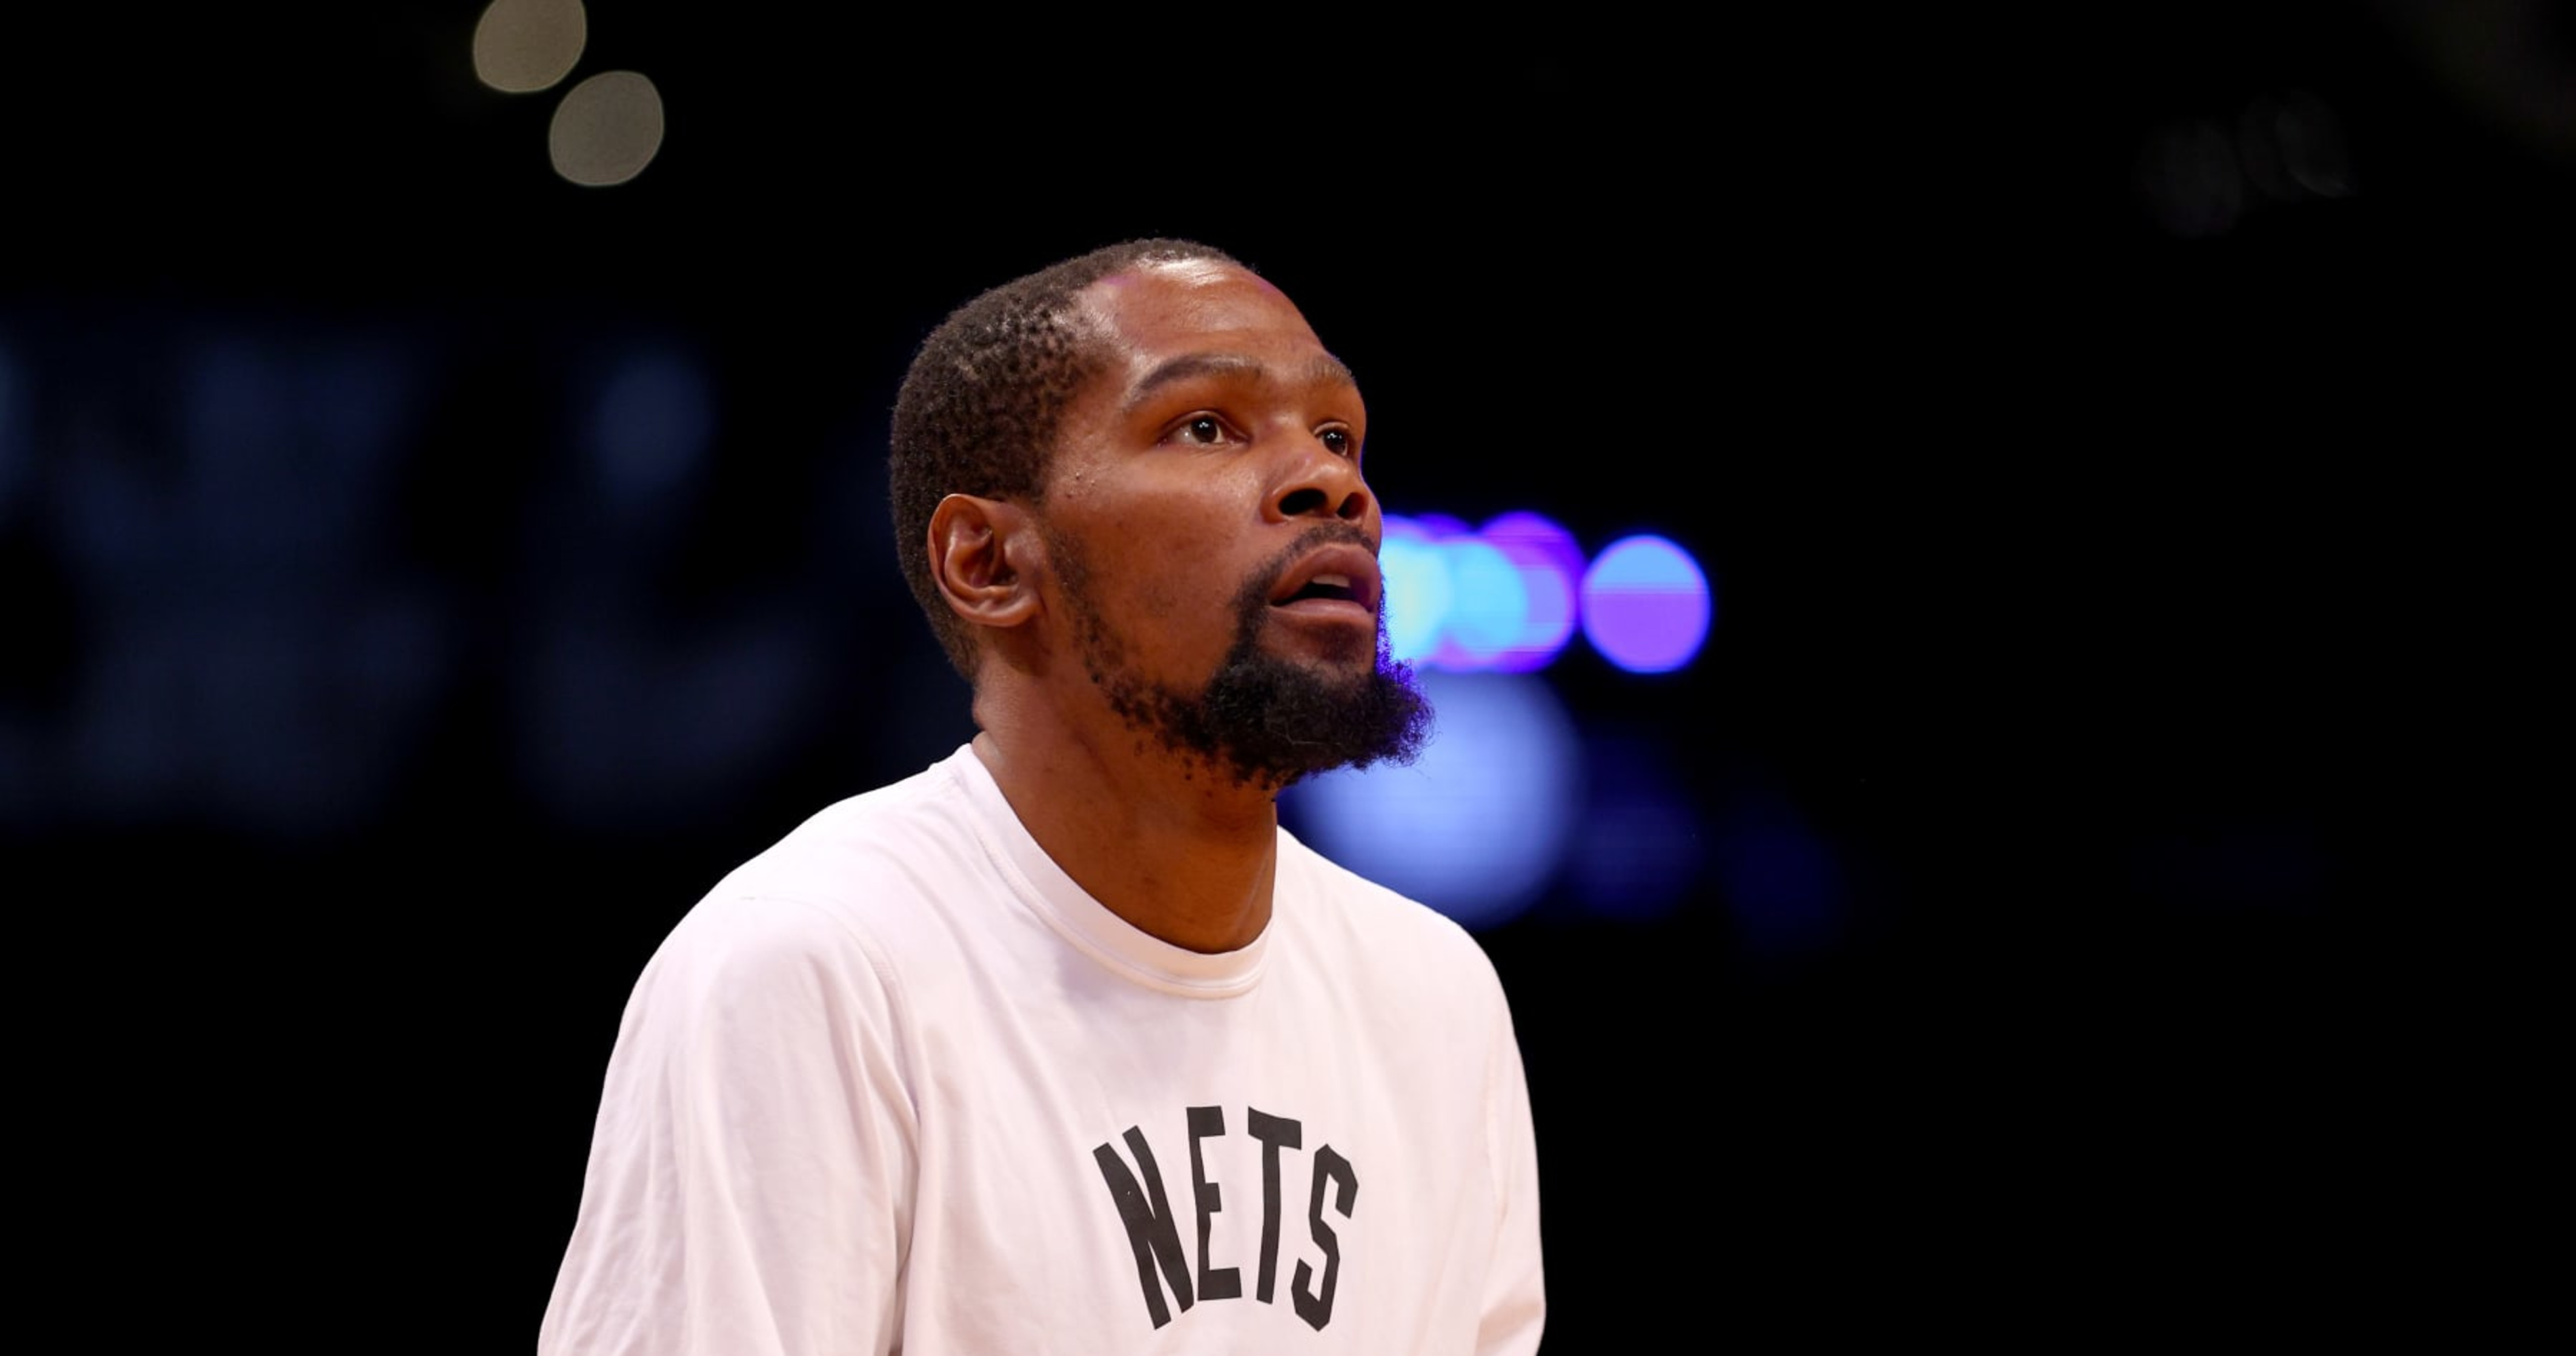 Nets' Kevin Durant Denies Retirement Rumors: 'S--t Is Comical at This Point'